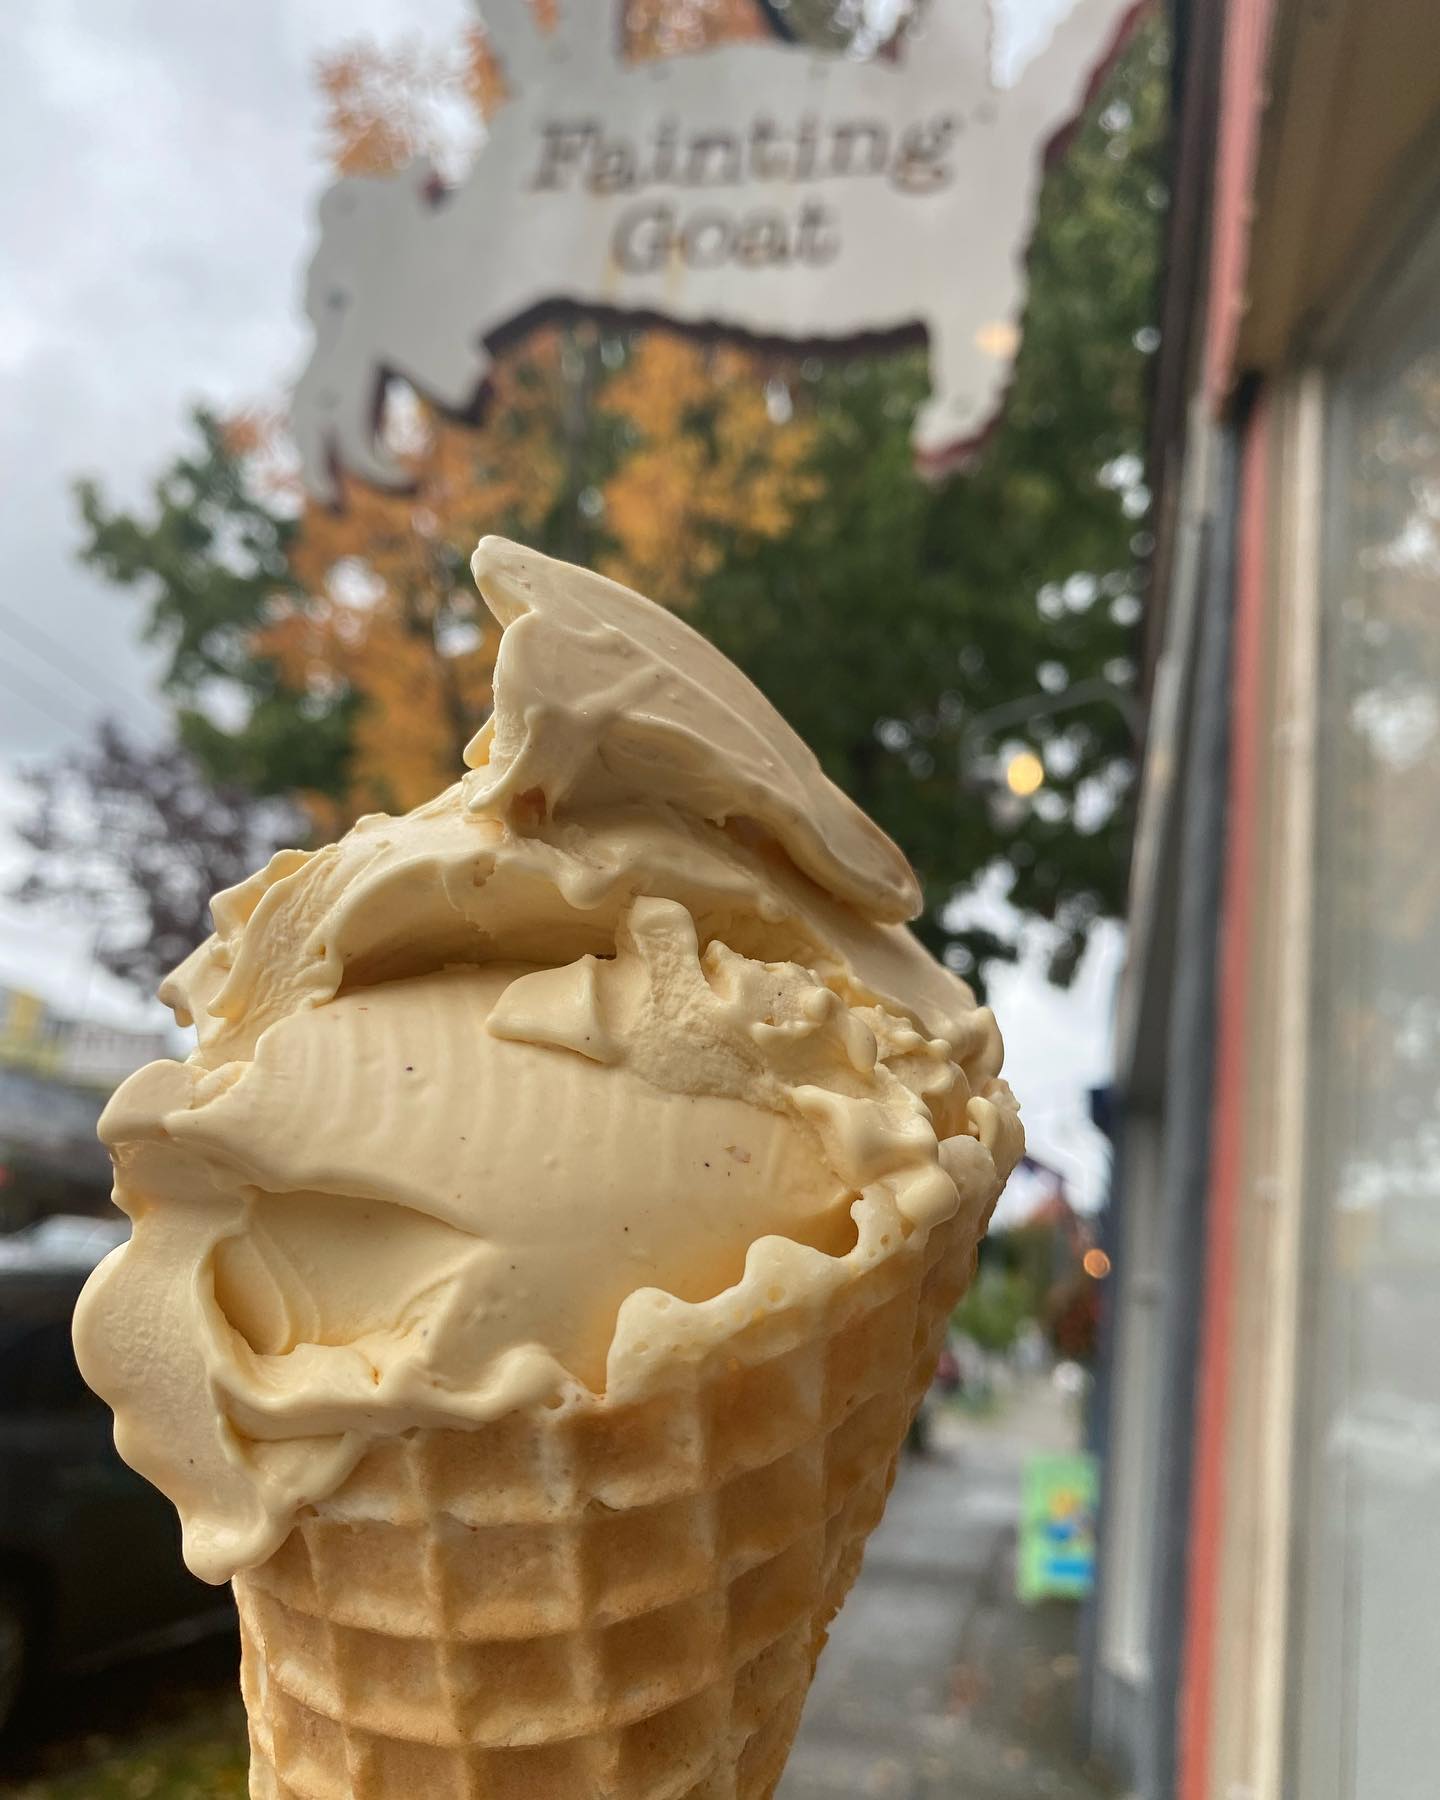 An ice cream cone from Fainting Goat Gelato